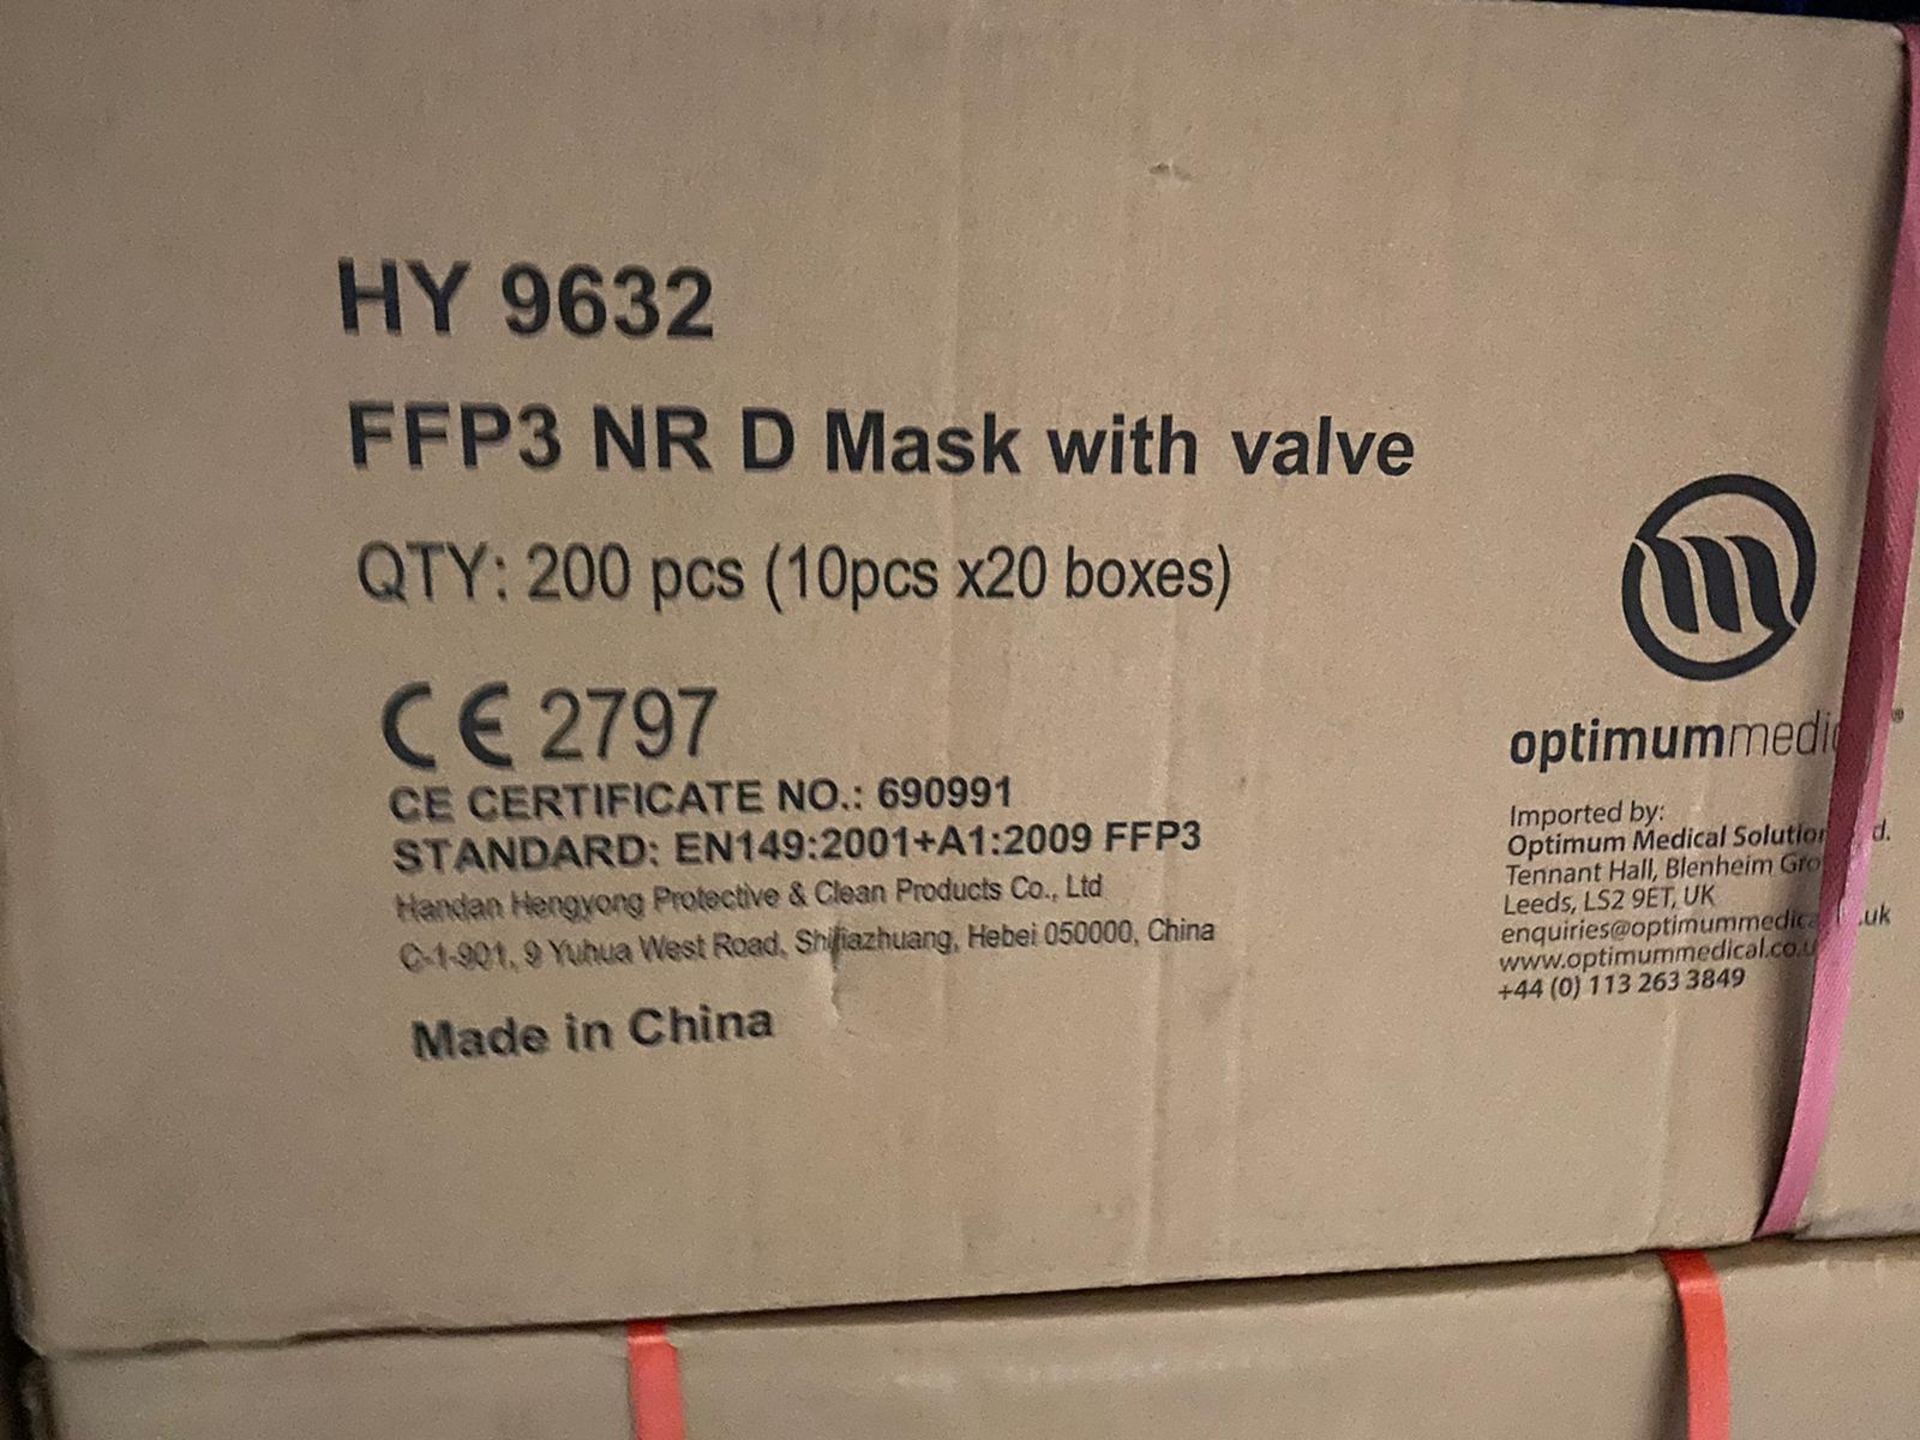 1,000 x Handanhy Fold Flat Disposable Face Masks With Exhalation Valves - Type HY8232 FFP3 - PPE - Image 4 of 5